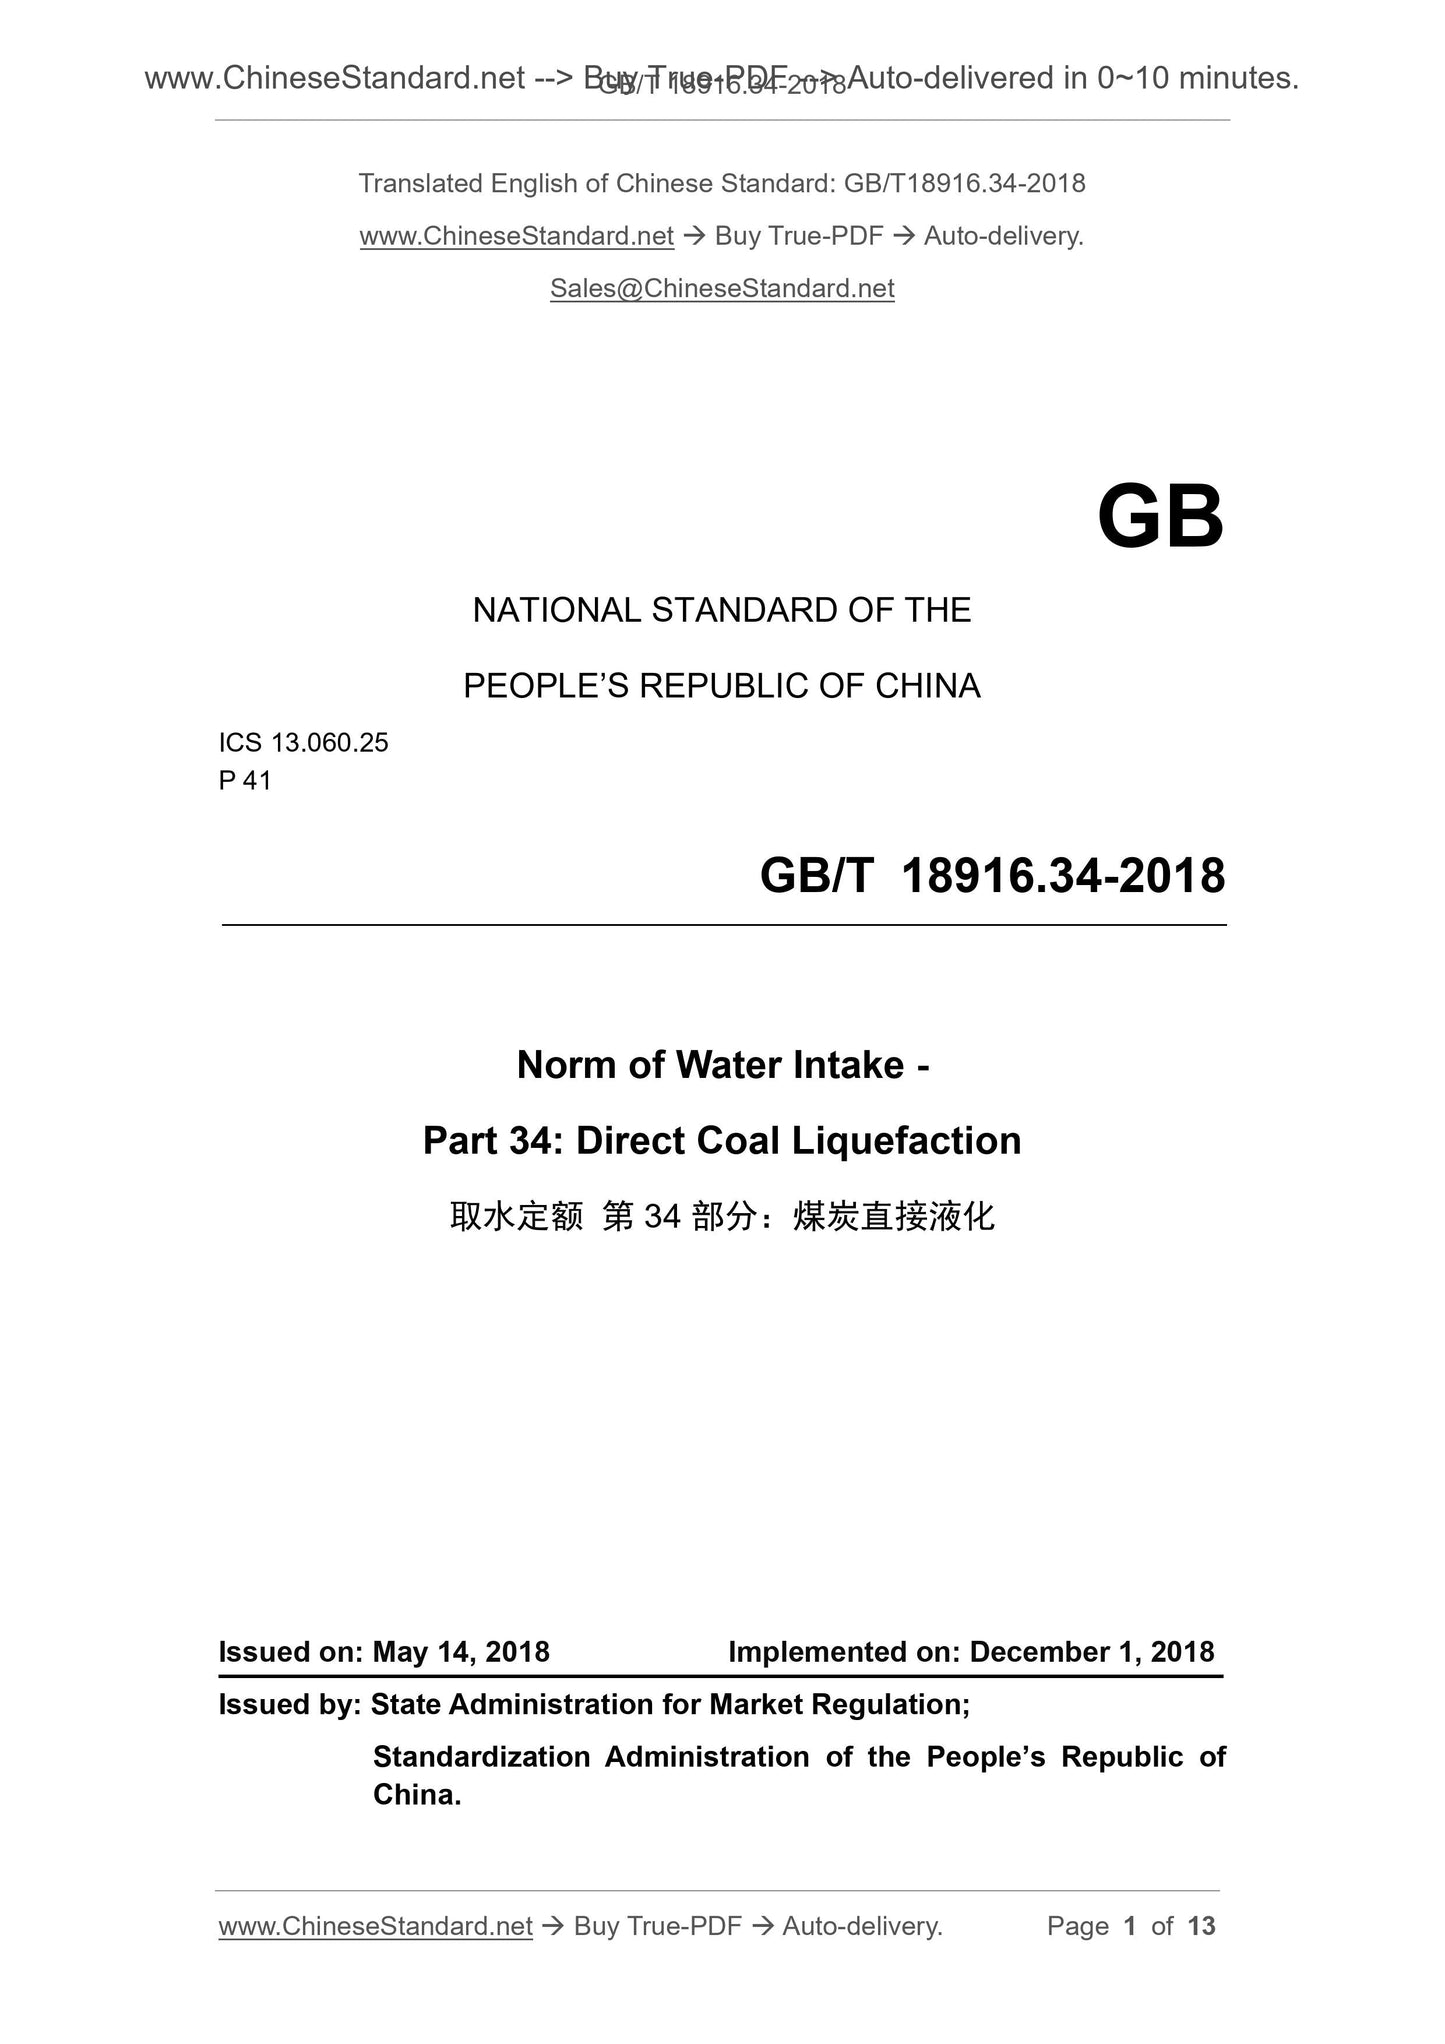 GB/T 18916.34-2018 Page 1